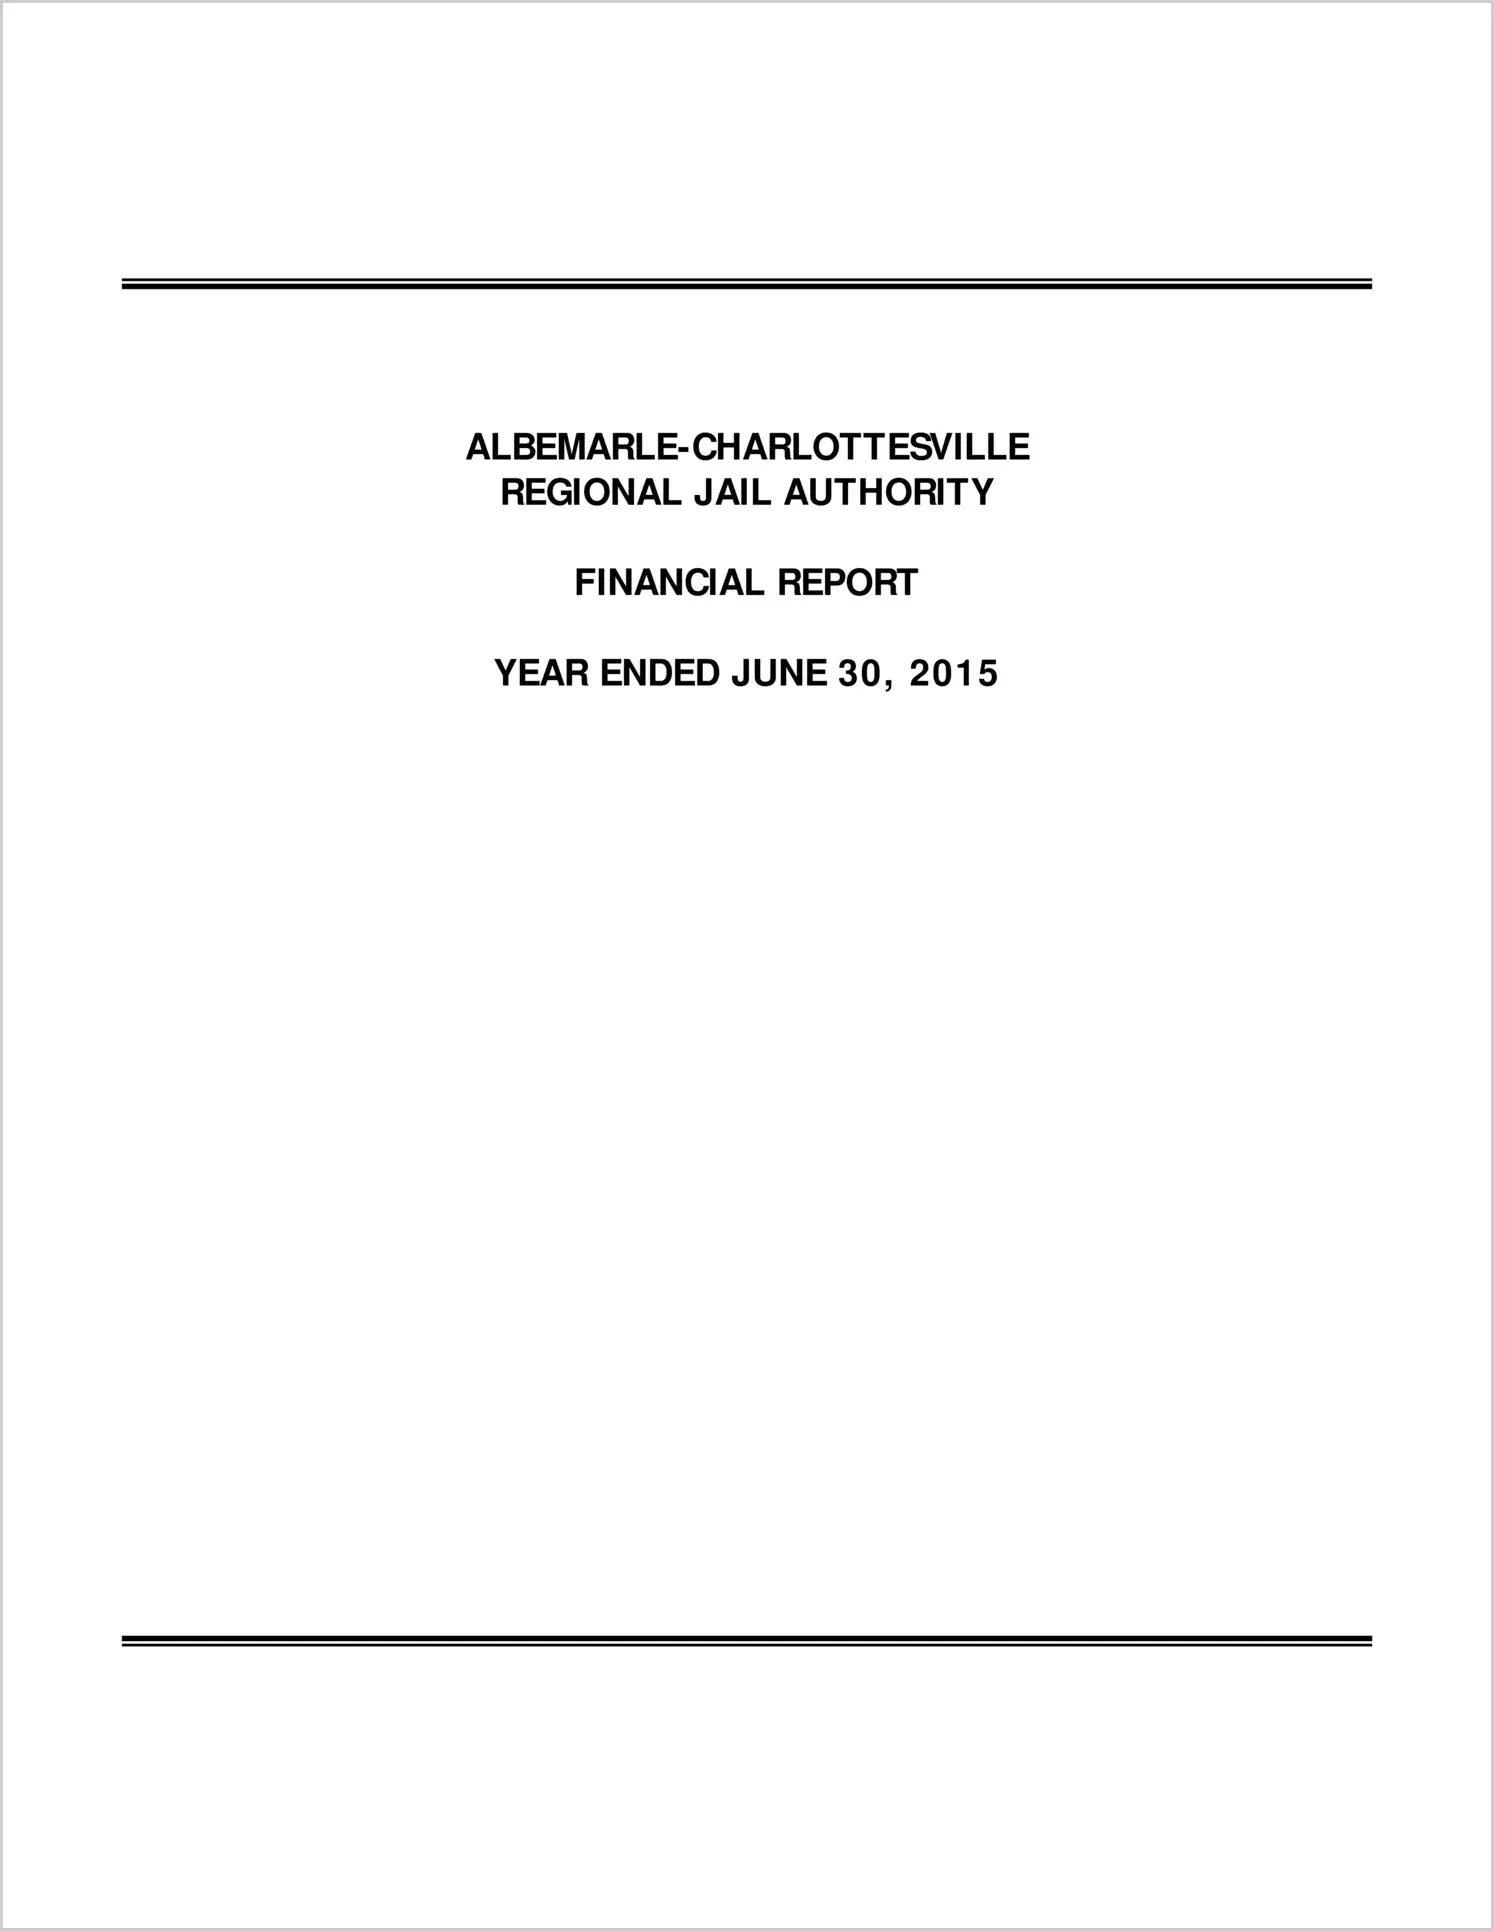 2015 ABC/Other Annual Financial Report  for Albemarle-Charlottesville Regional Jail Authority